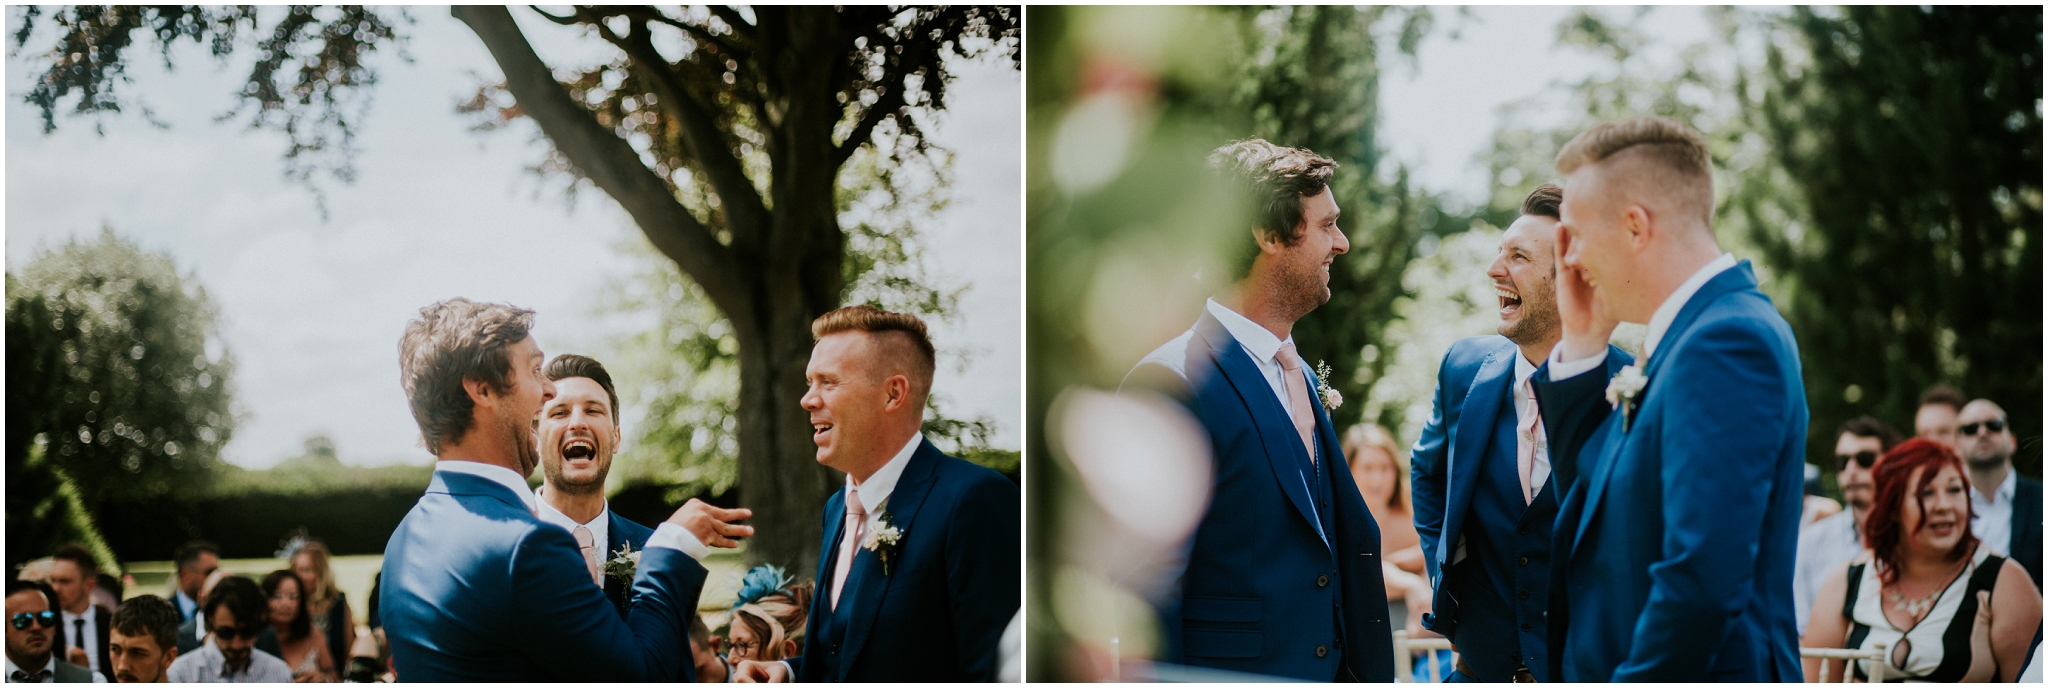 groom and best men laughing before wedding ceremony barn at woodlands norfolk